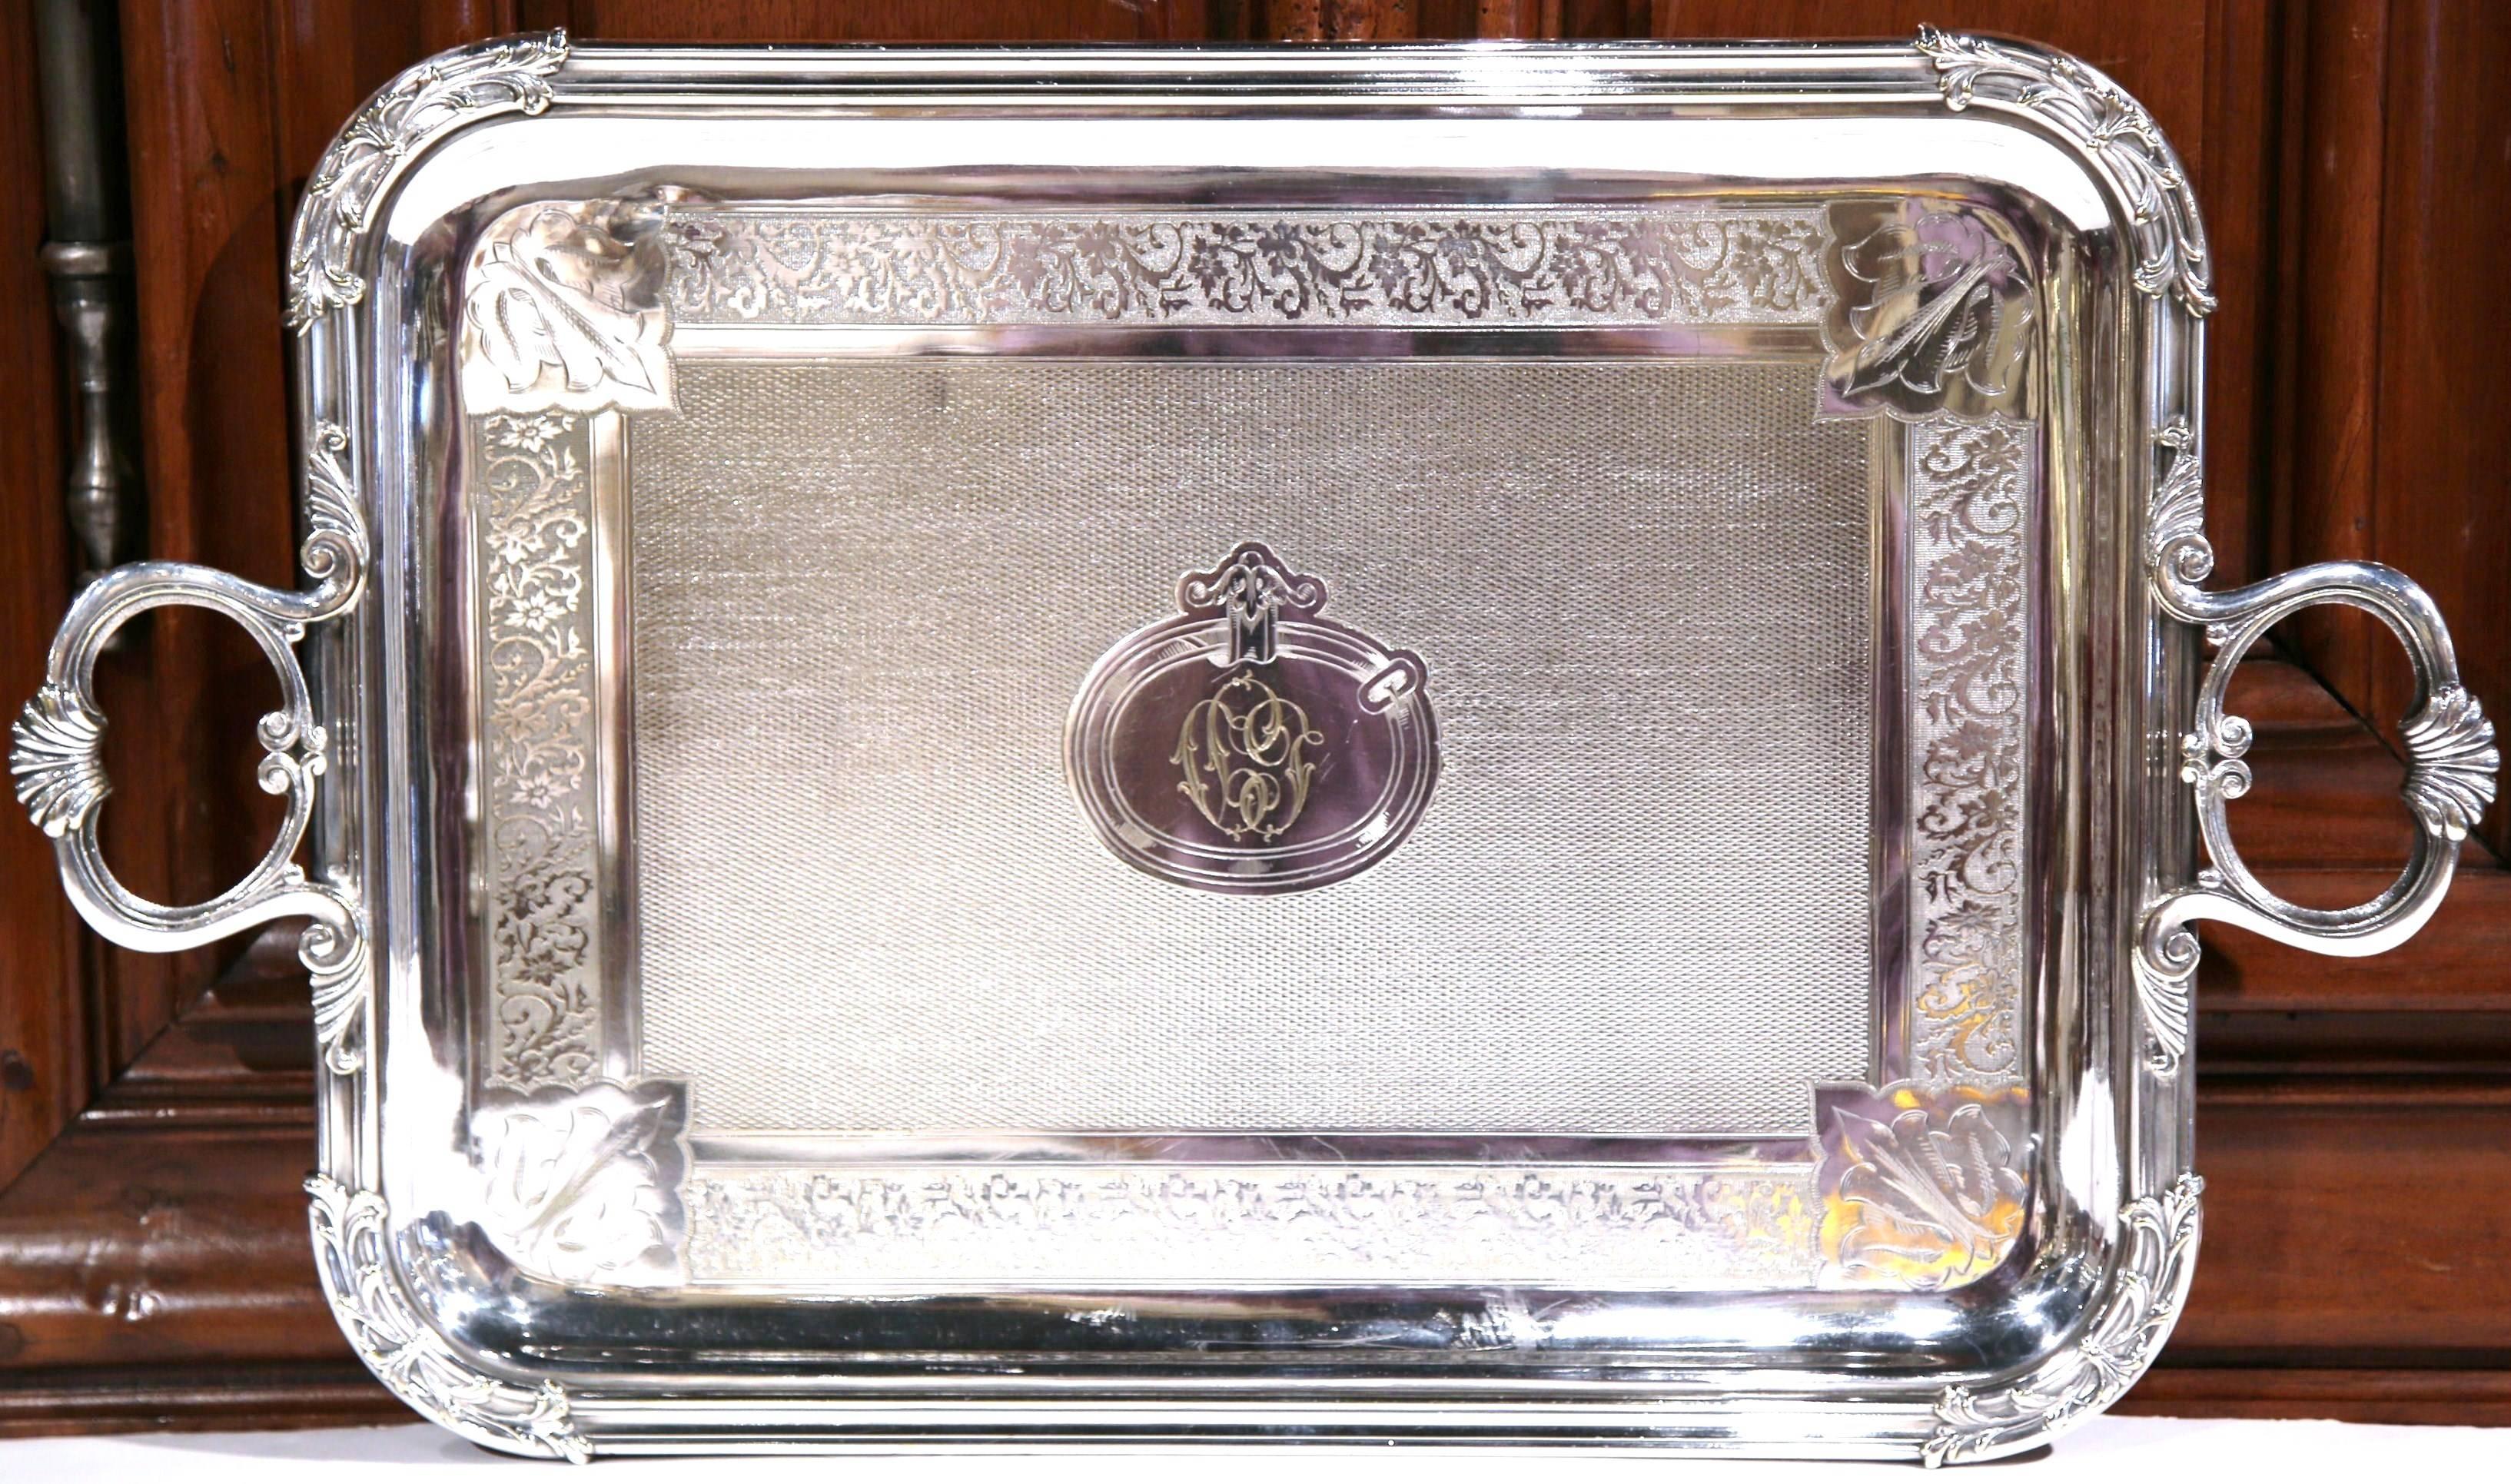 19th Century French Silver Plated Monogramed Tray Signed Pelloutier & Cie, 1894 For Sale 1